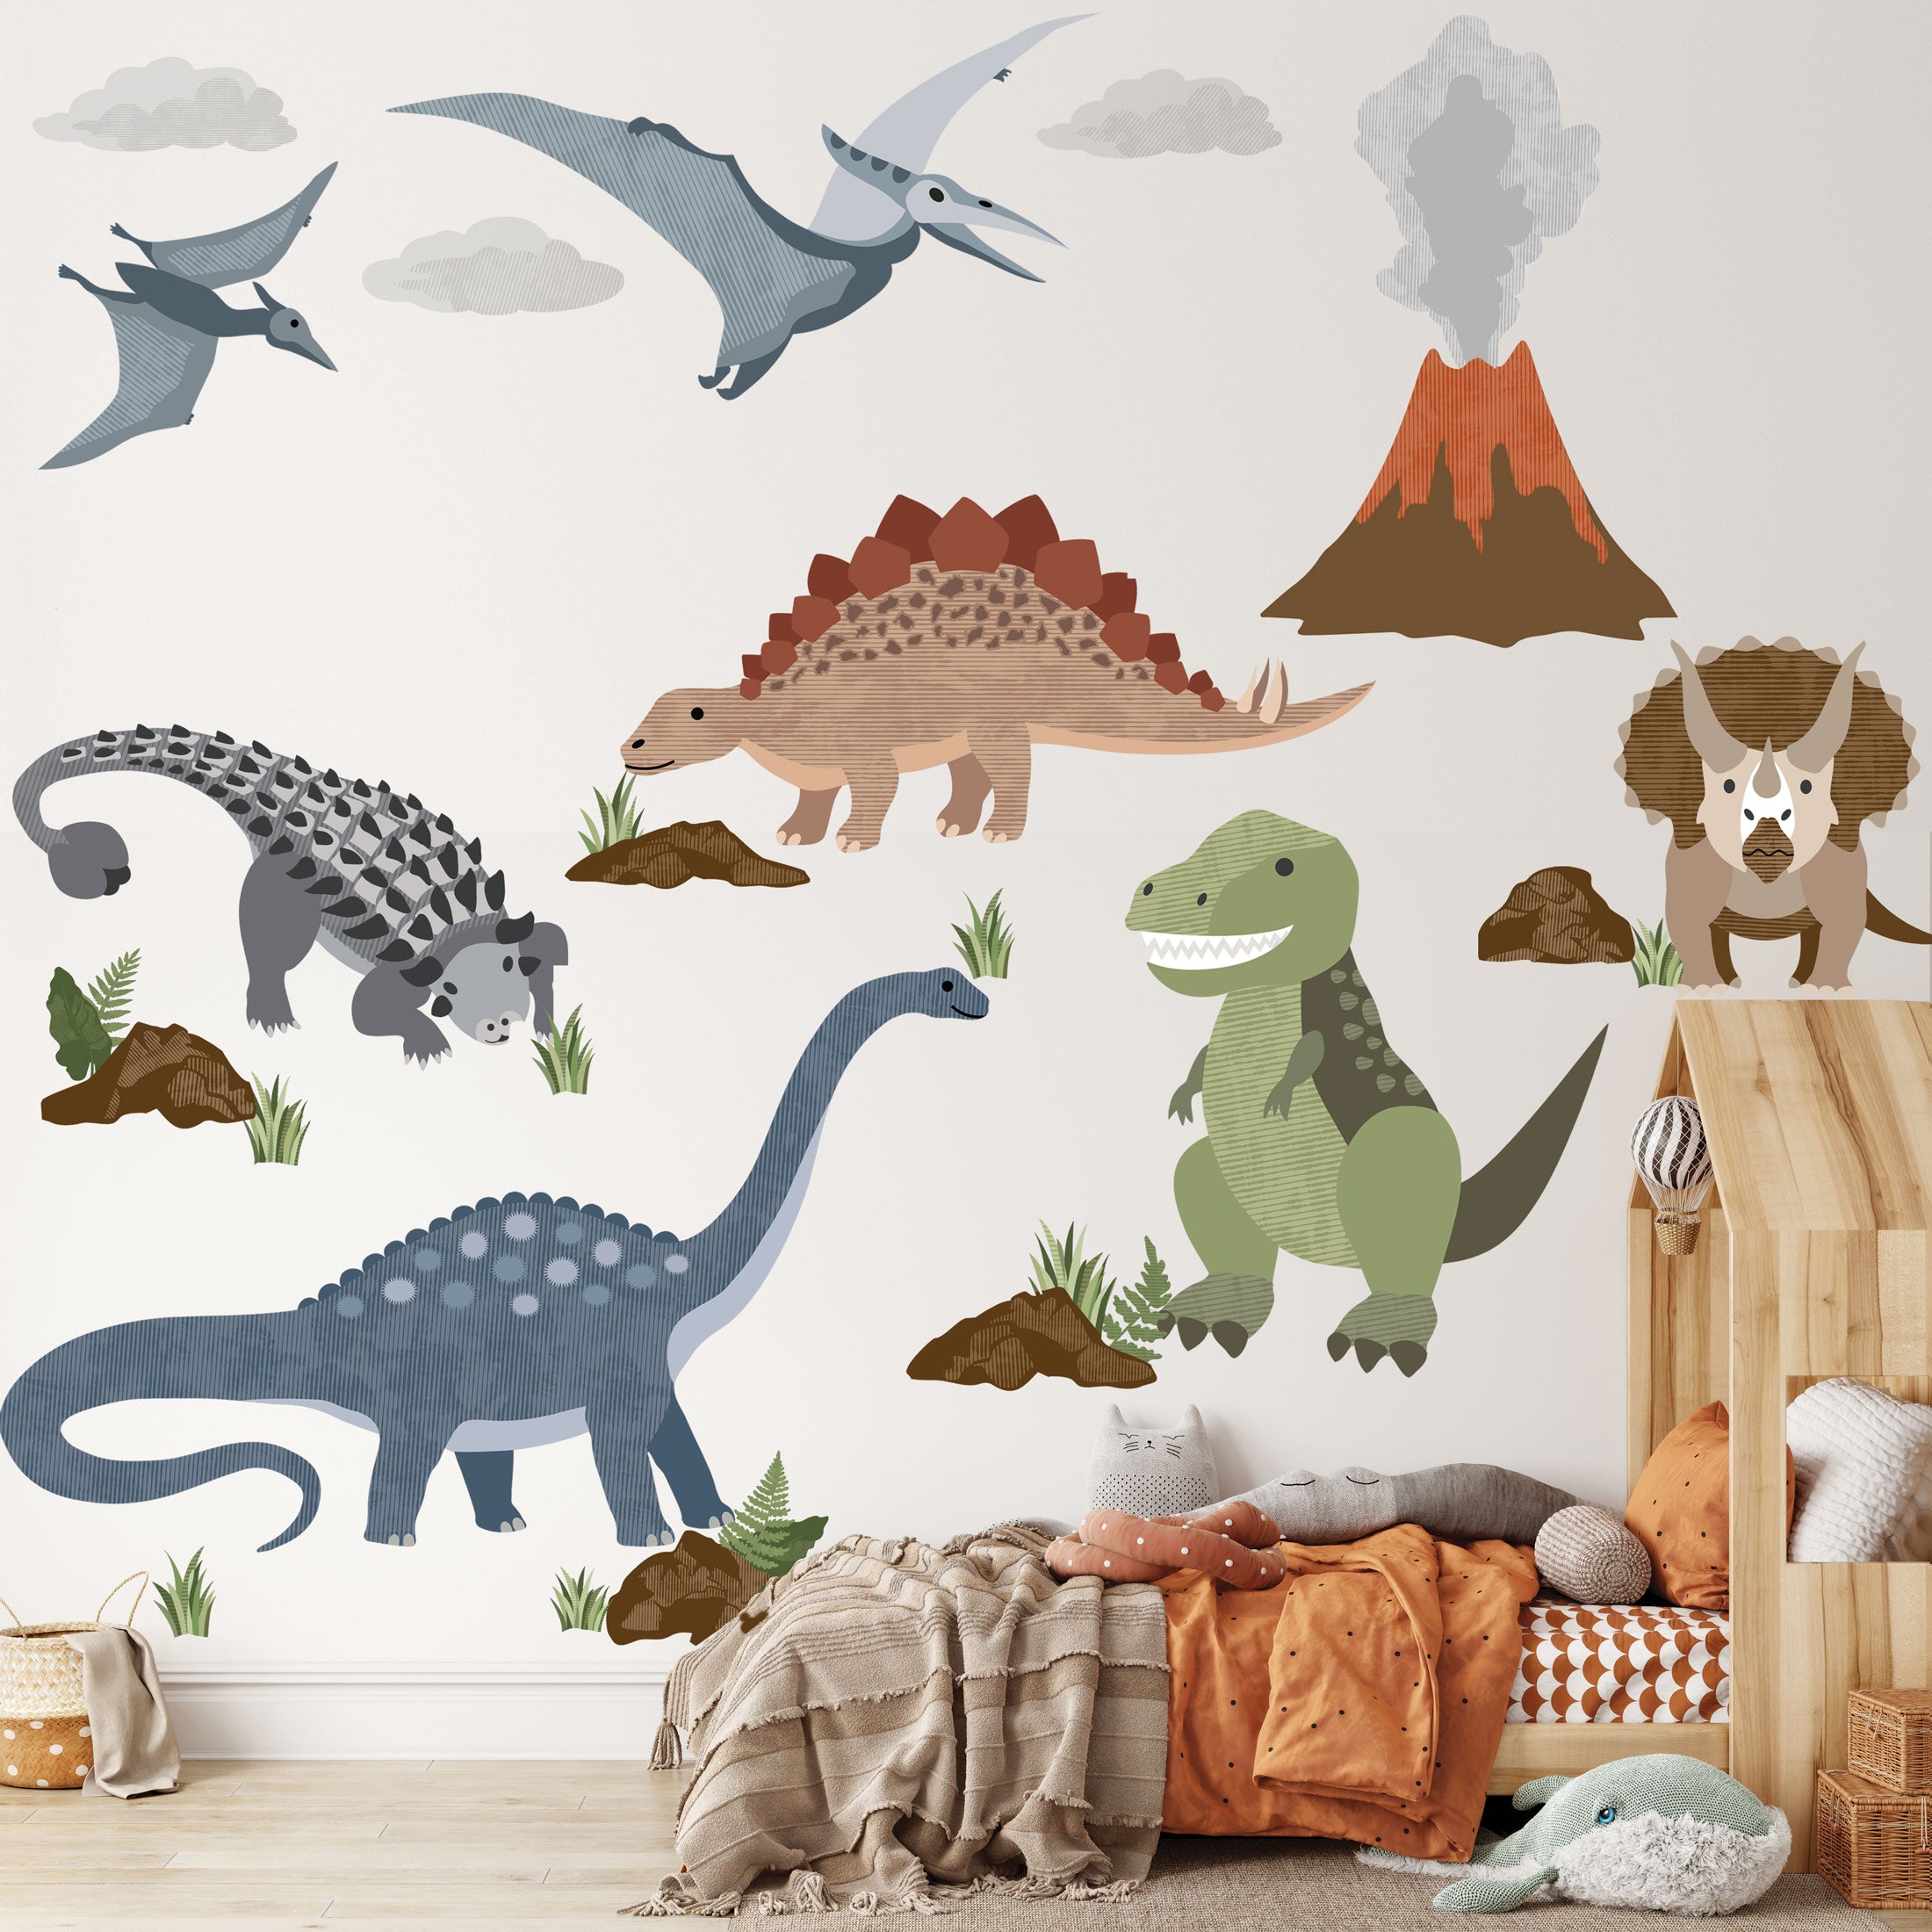 Large Dinosaur Wall Decals, Nursery Wall Stickers, Volcano Wall Decal,  T-Rex Wall Sticker, Dinosaur Mural, Eco Friendly Wall Decals